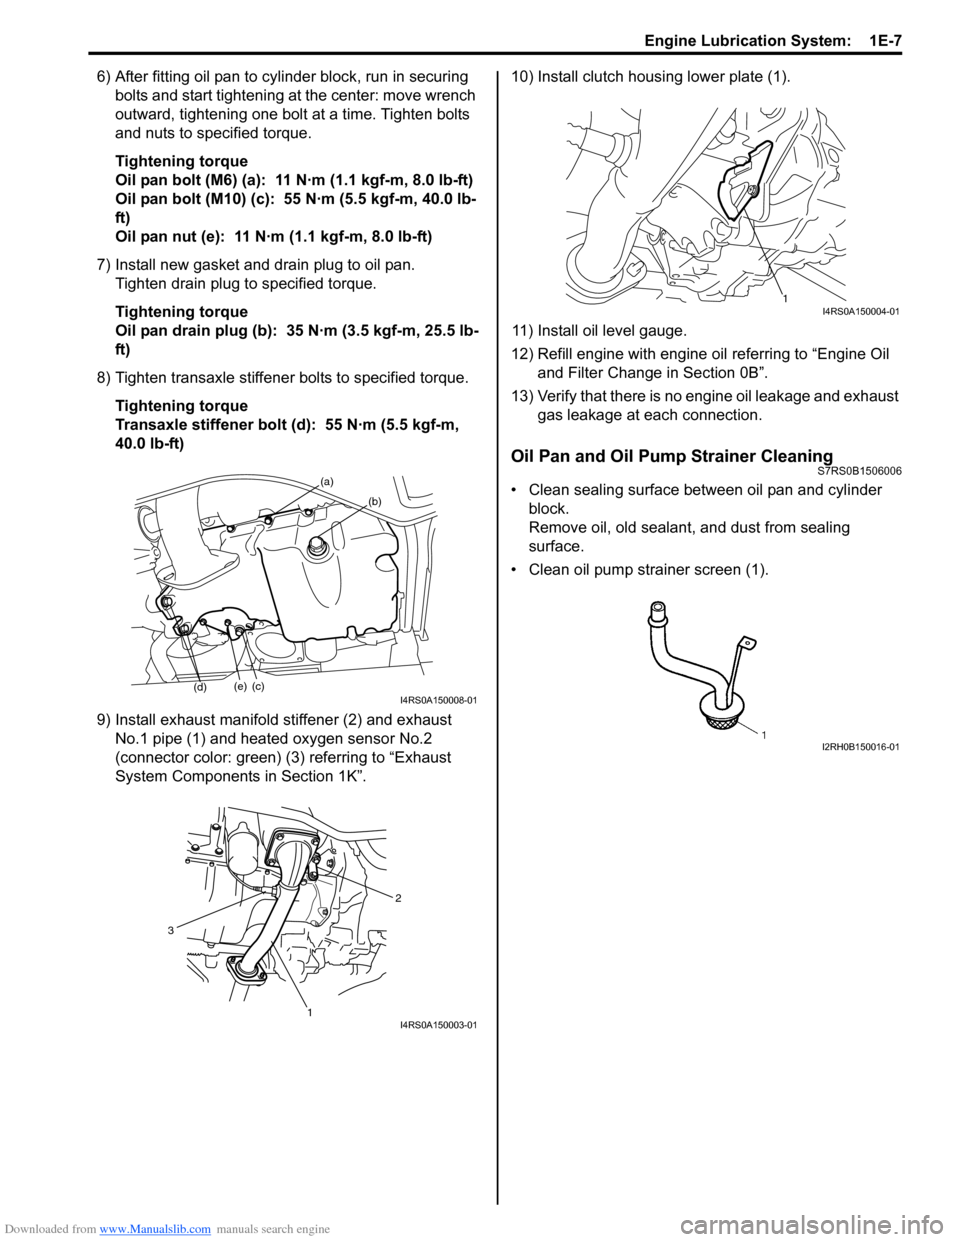 SUZUKI SWIFT 2007 2.G Service User Guide Downloaded from www.Manualslib.com manuals search engine Engine Lubrication System:  1E-7
6) After fitting oil pan to cylinder block, run in securing bolts and start tightening at the center: move wre